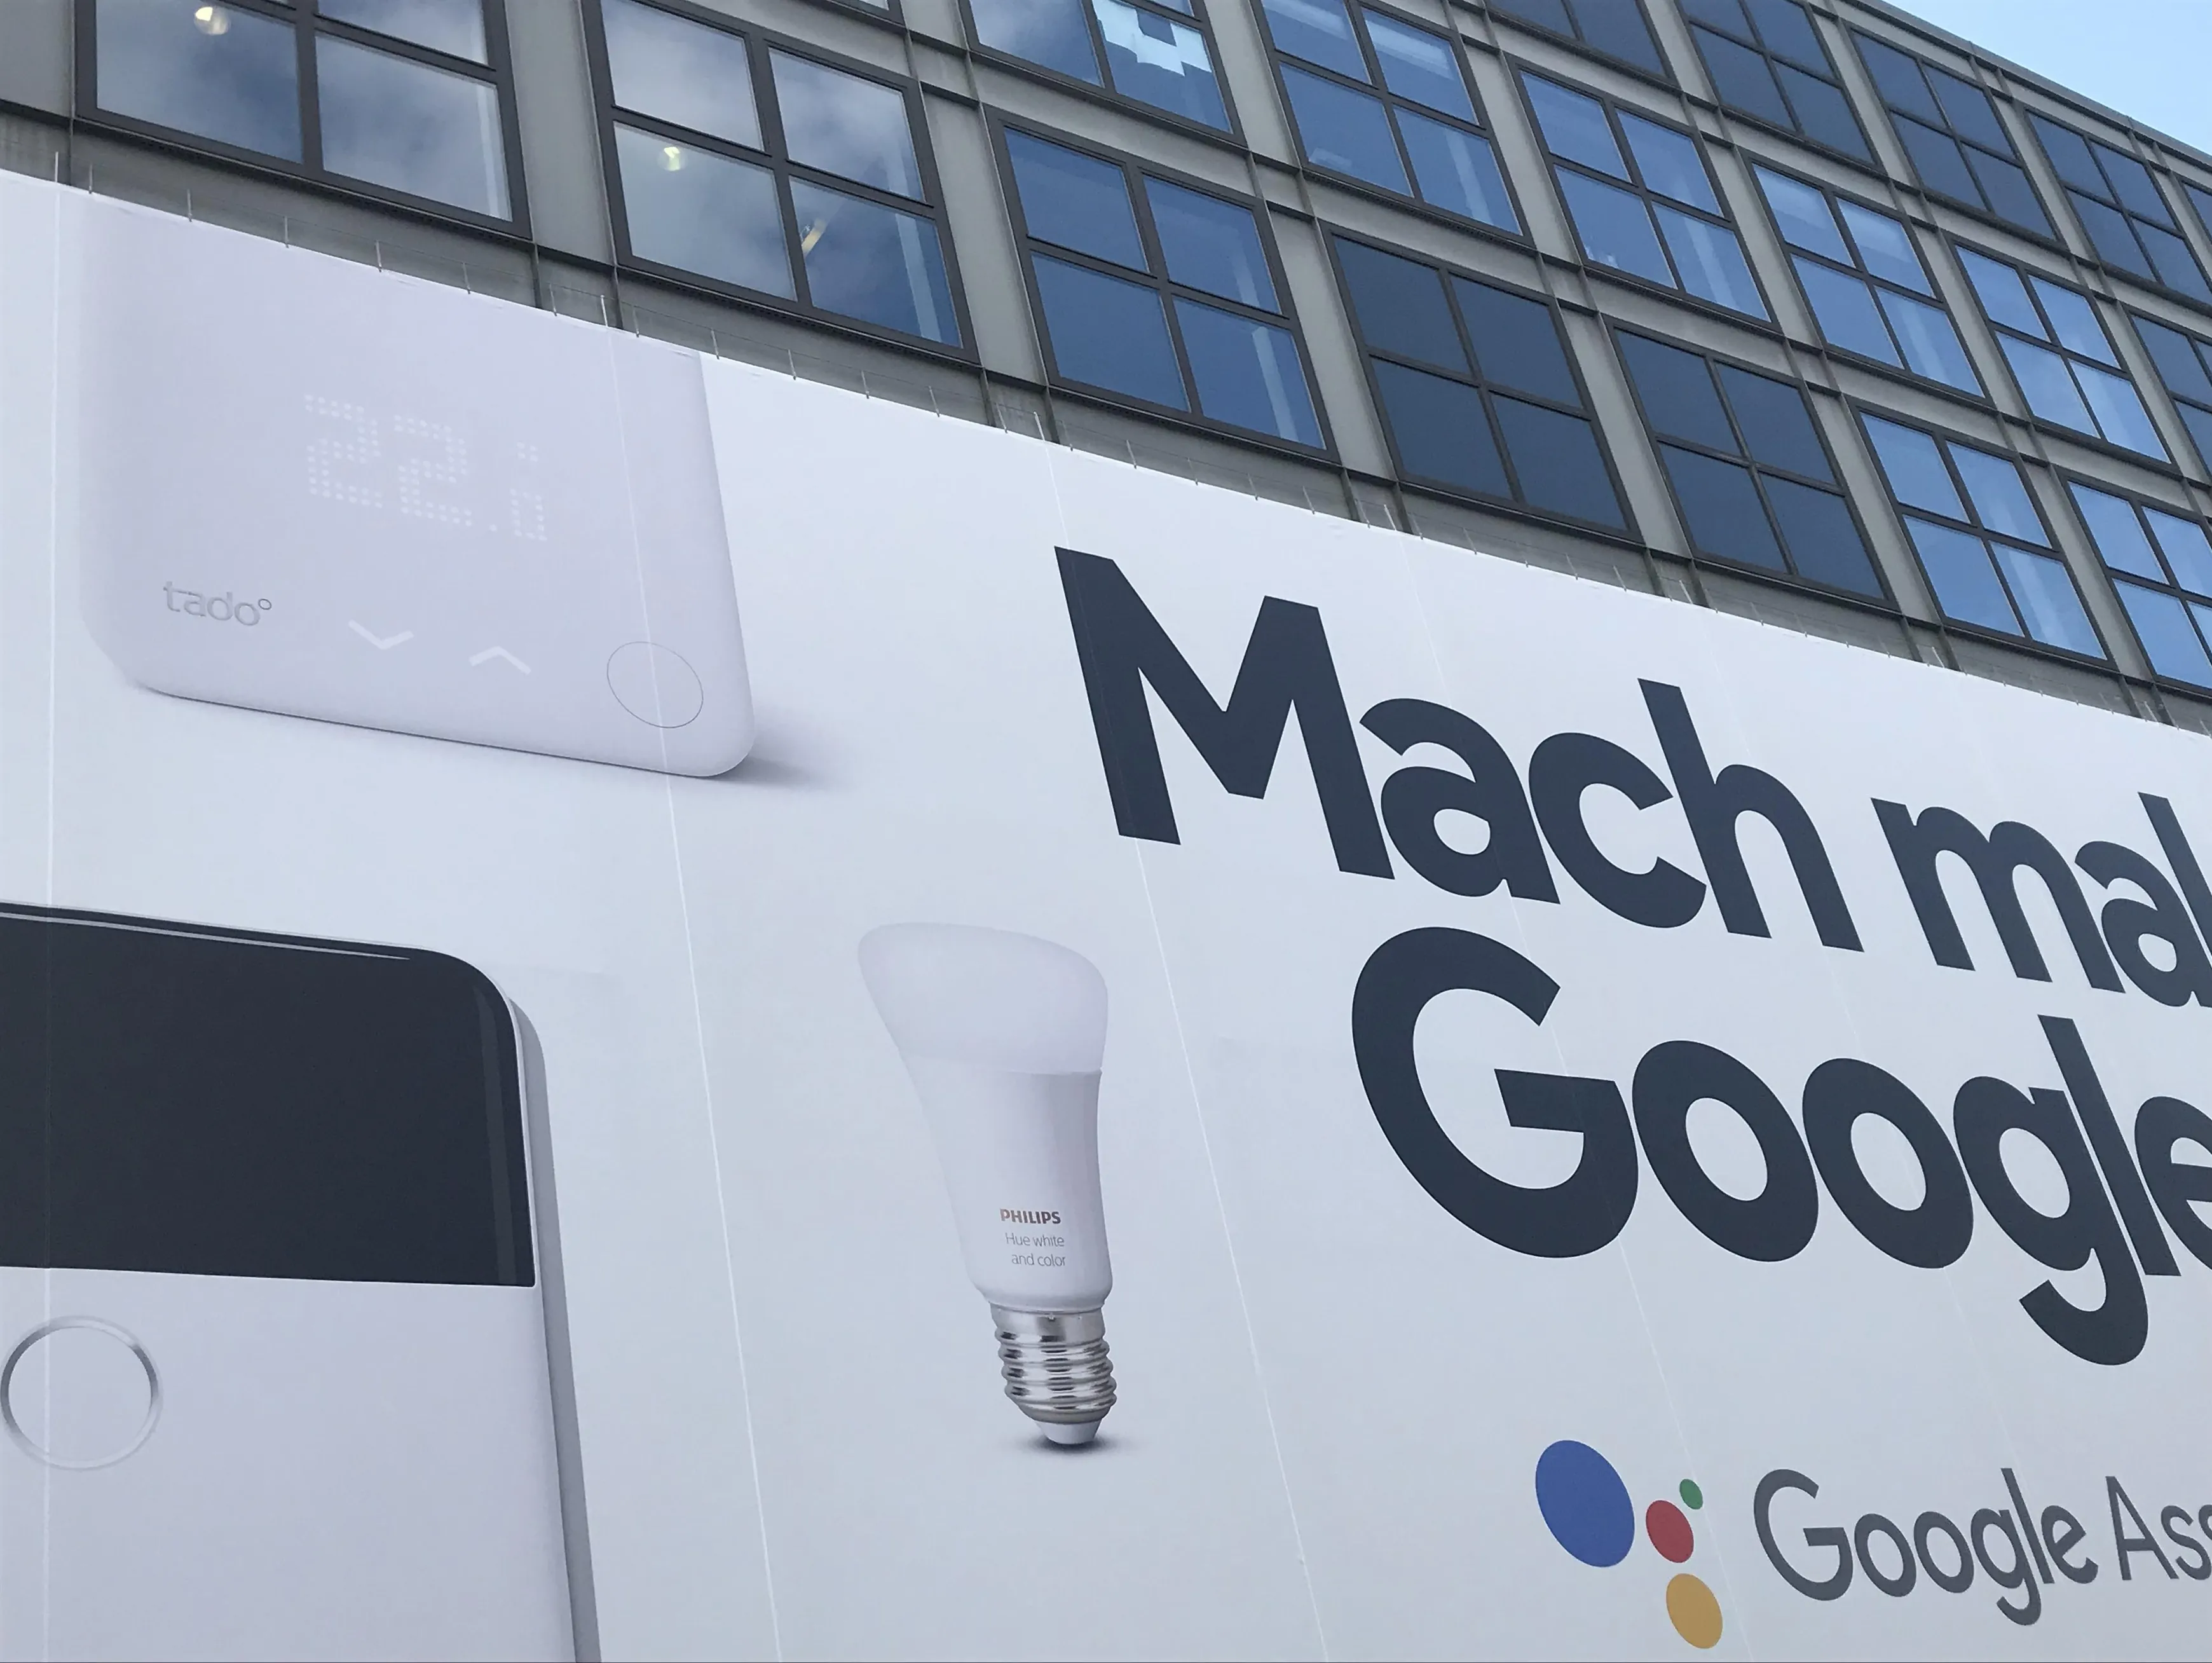 A tado smart thermostat on a big wall ad next to philips and google products